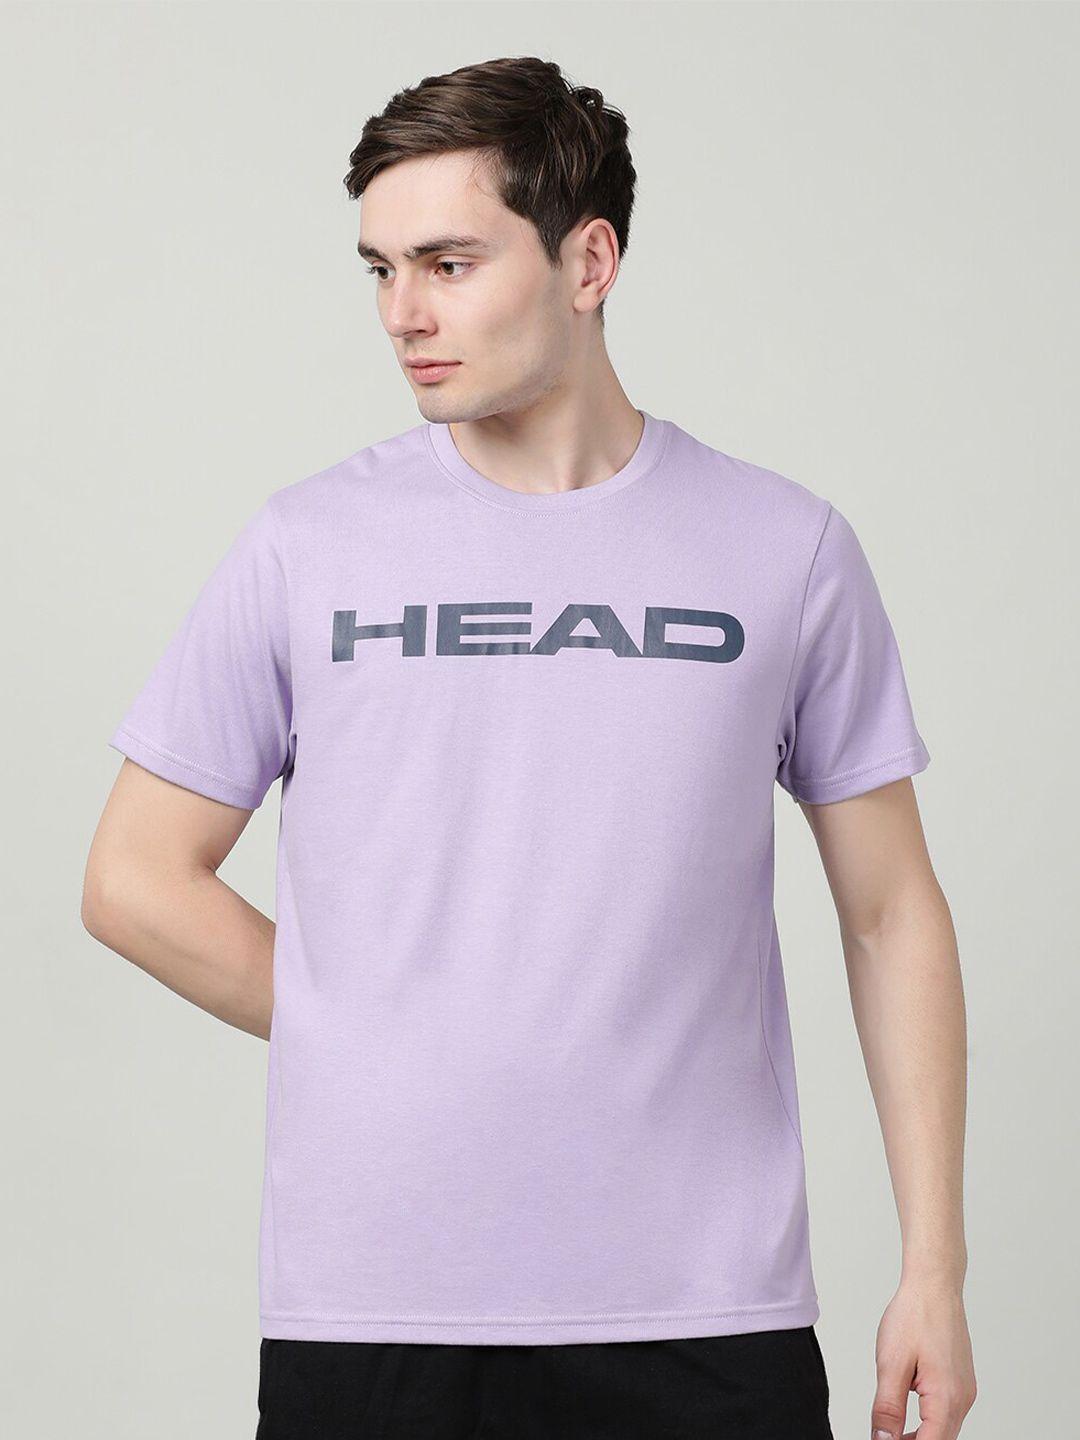 head typography printed cotton t-shirt